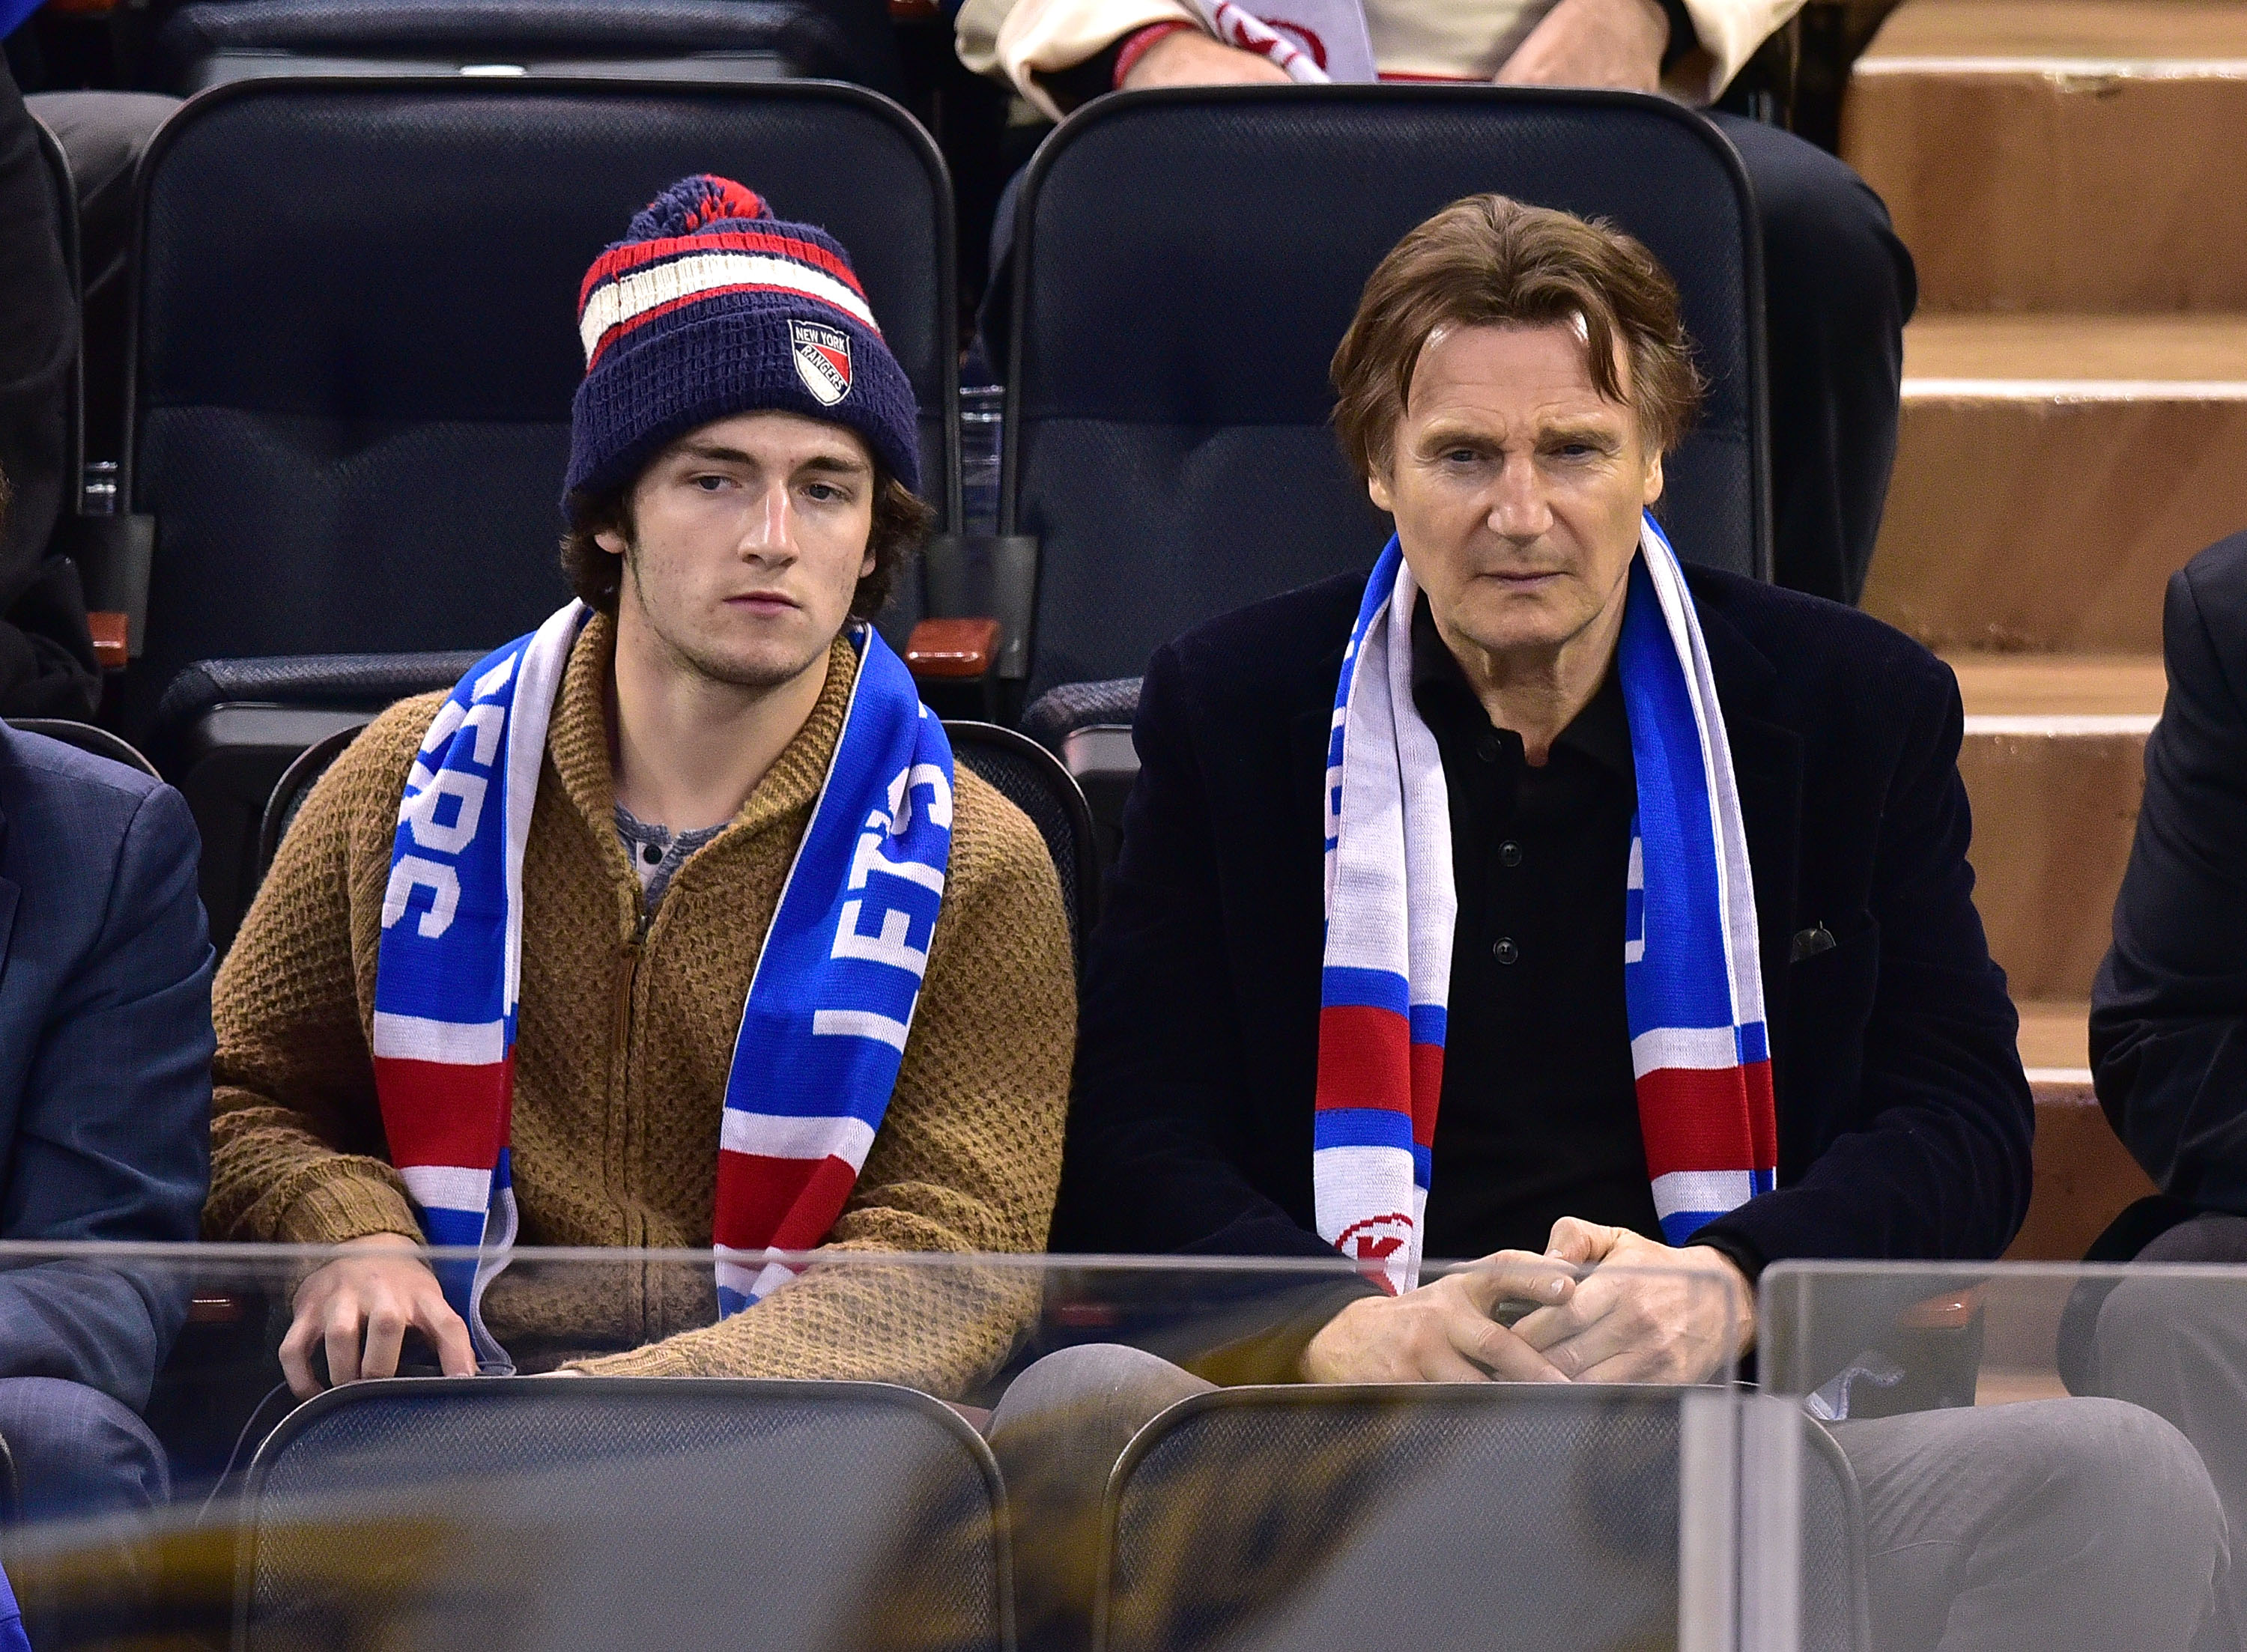  Daniel Neeson and Liam Neeson on January 20, 2015 in New York City | Source: Getty Images